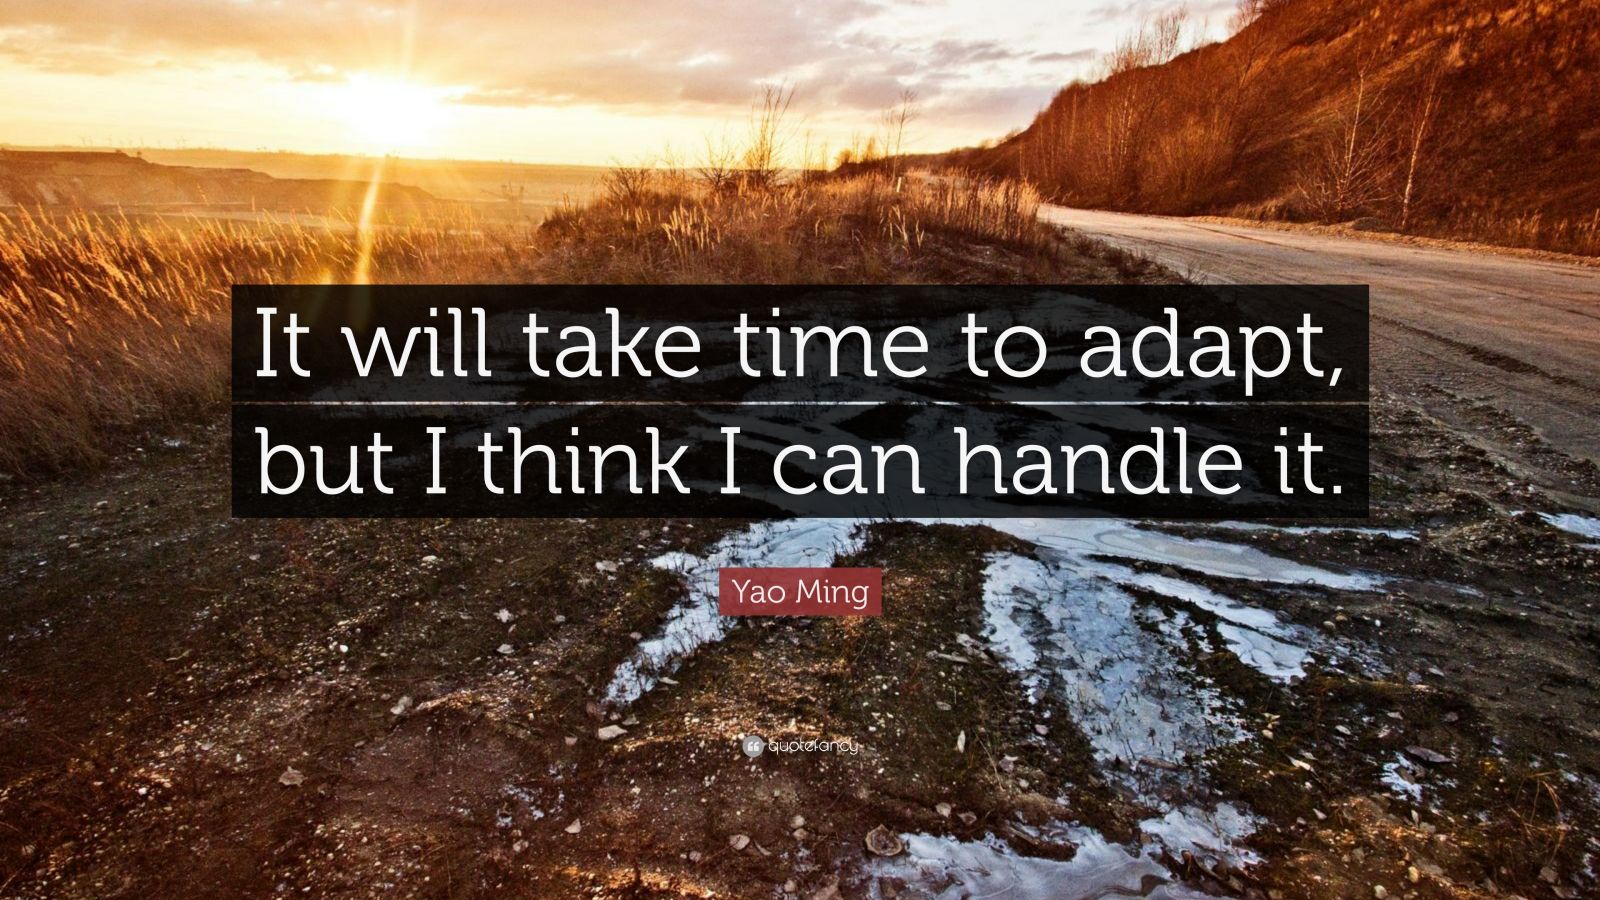 Yao Ming Quote: “It will take time to adapt, but I think I can handle ...